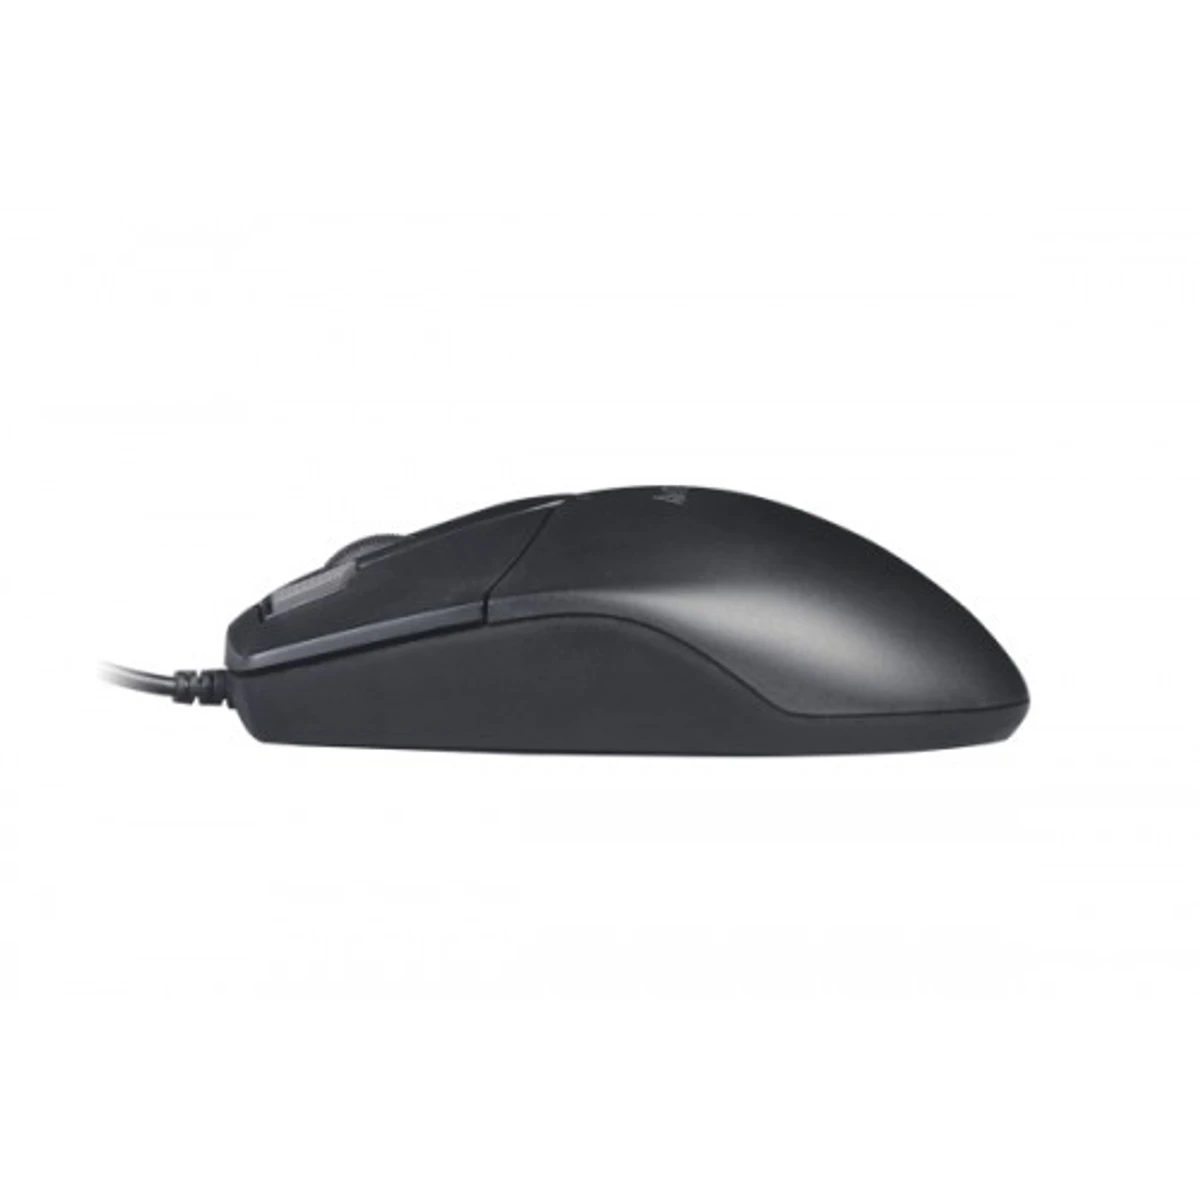 A4TECH OP-730D Optical Wired Mouse